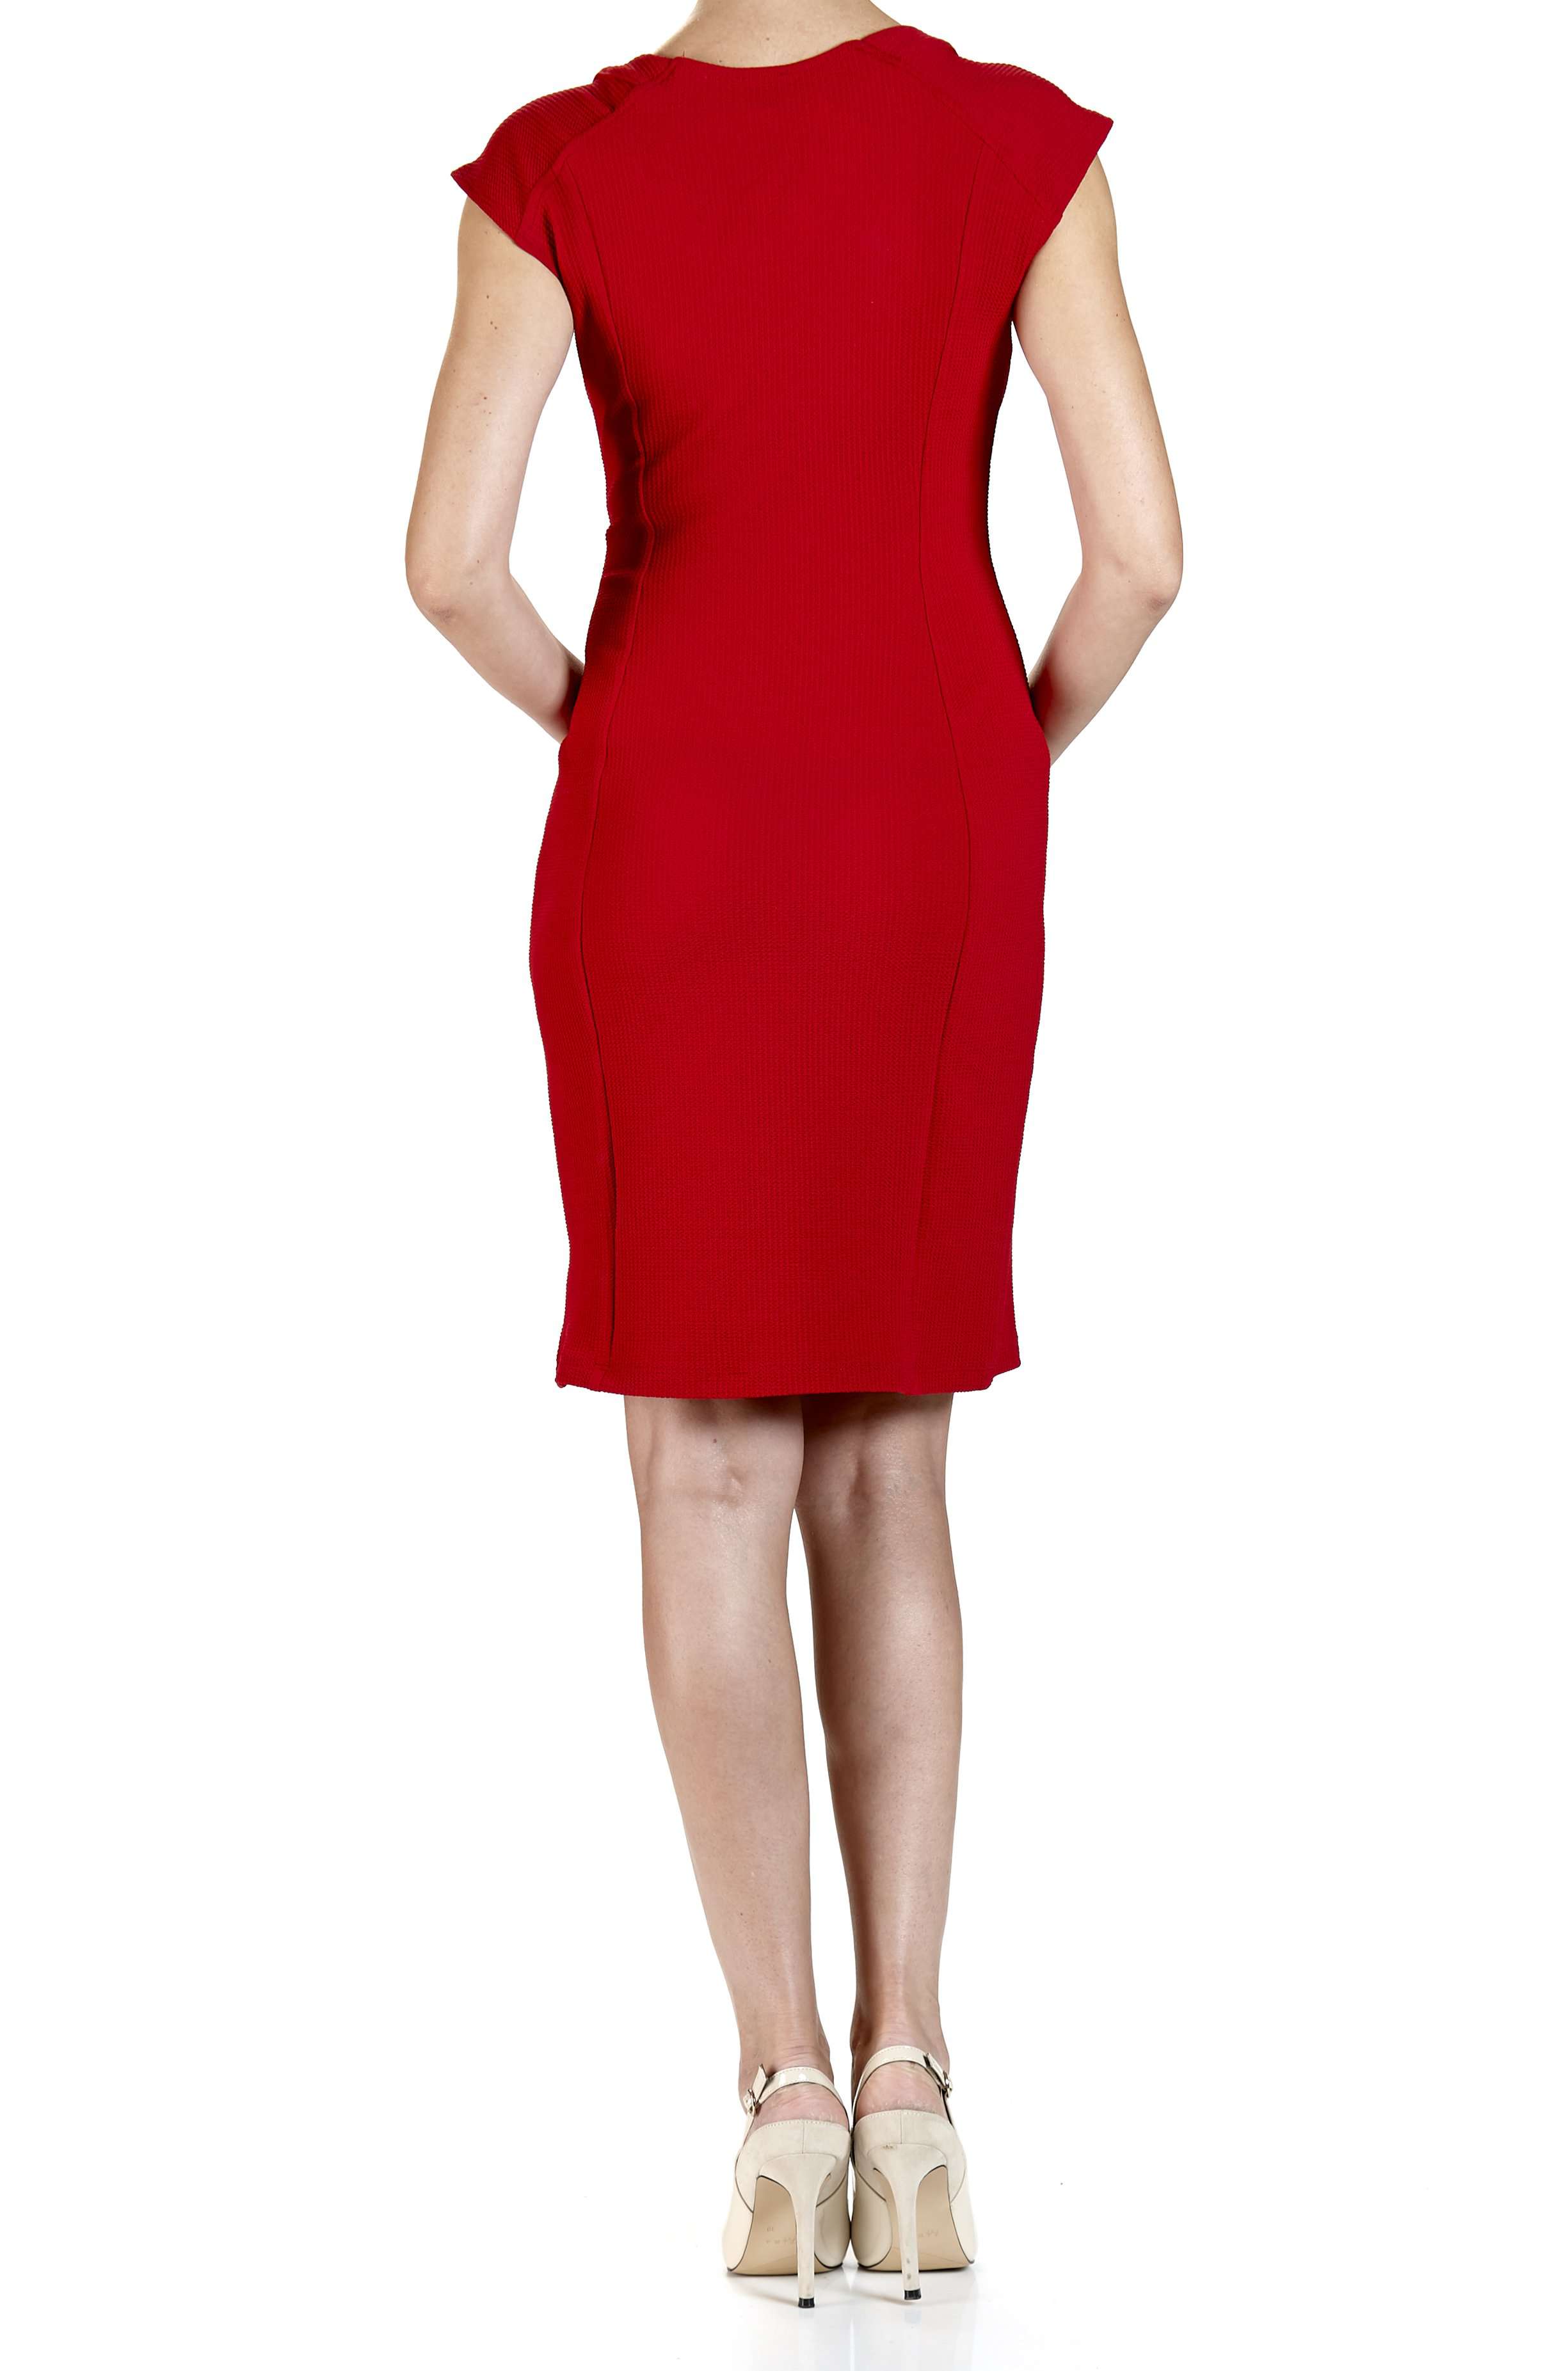 EXPRESS Red Bandage Bodycon Dress for Valentines - $22 - From Carey